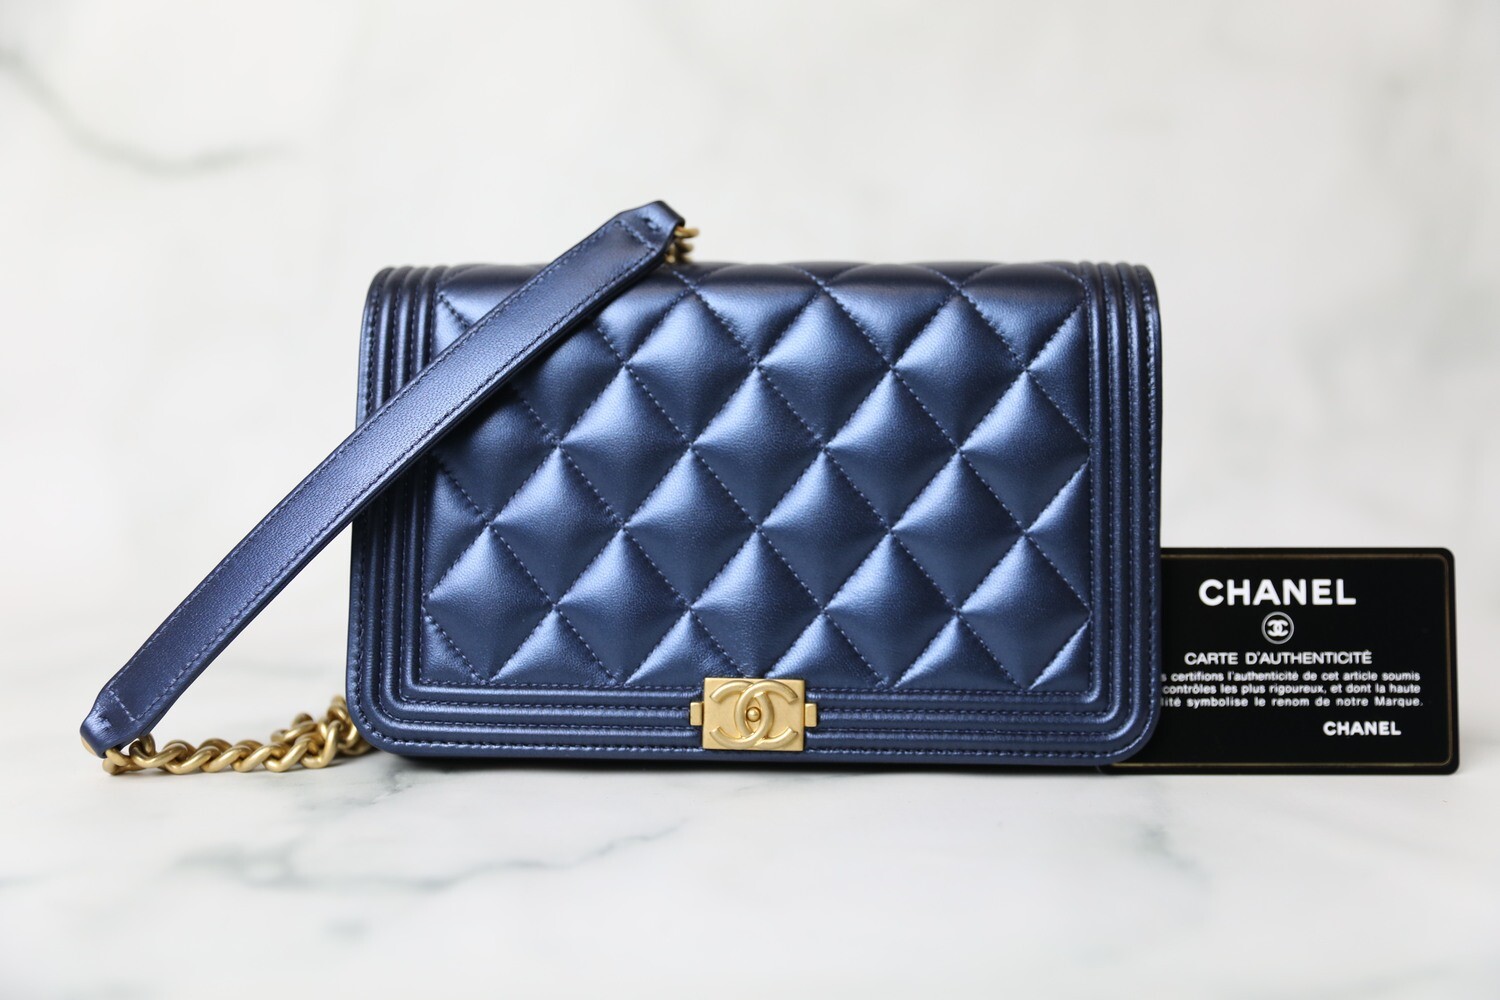 Chanel - Authenticated Clutch Bag - Leather Blue Plain for Women, Never Worn